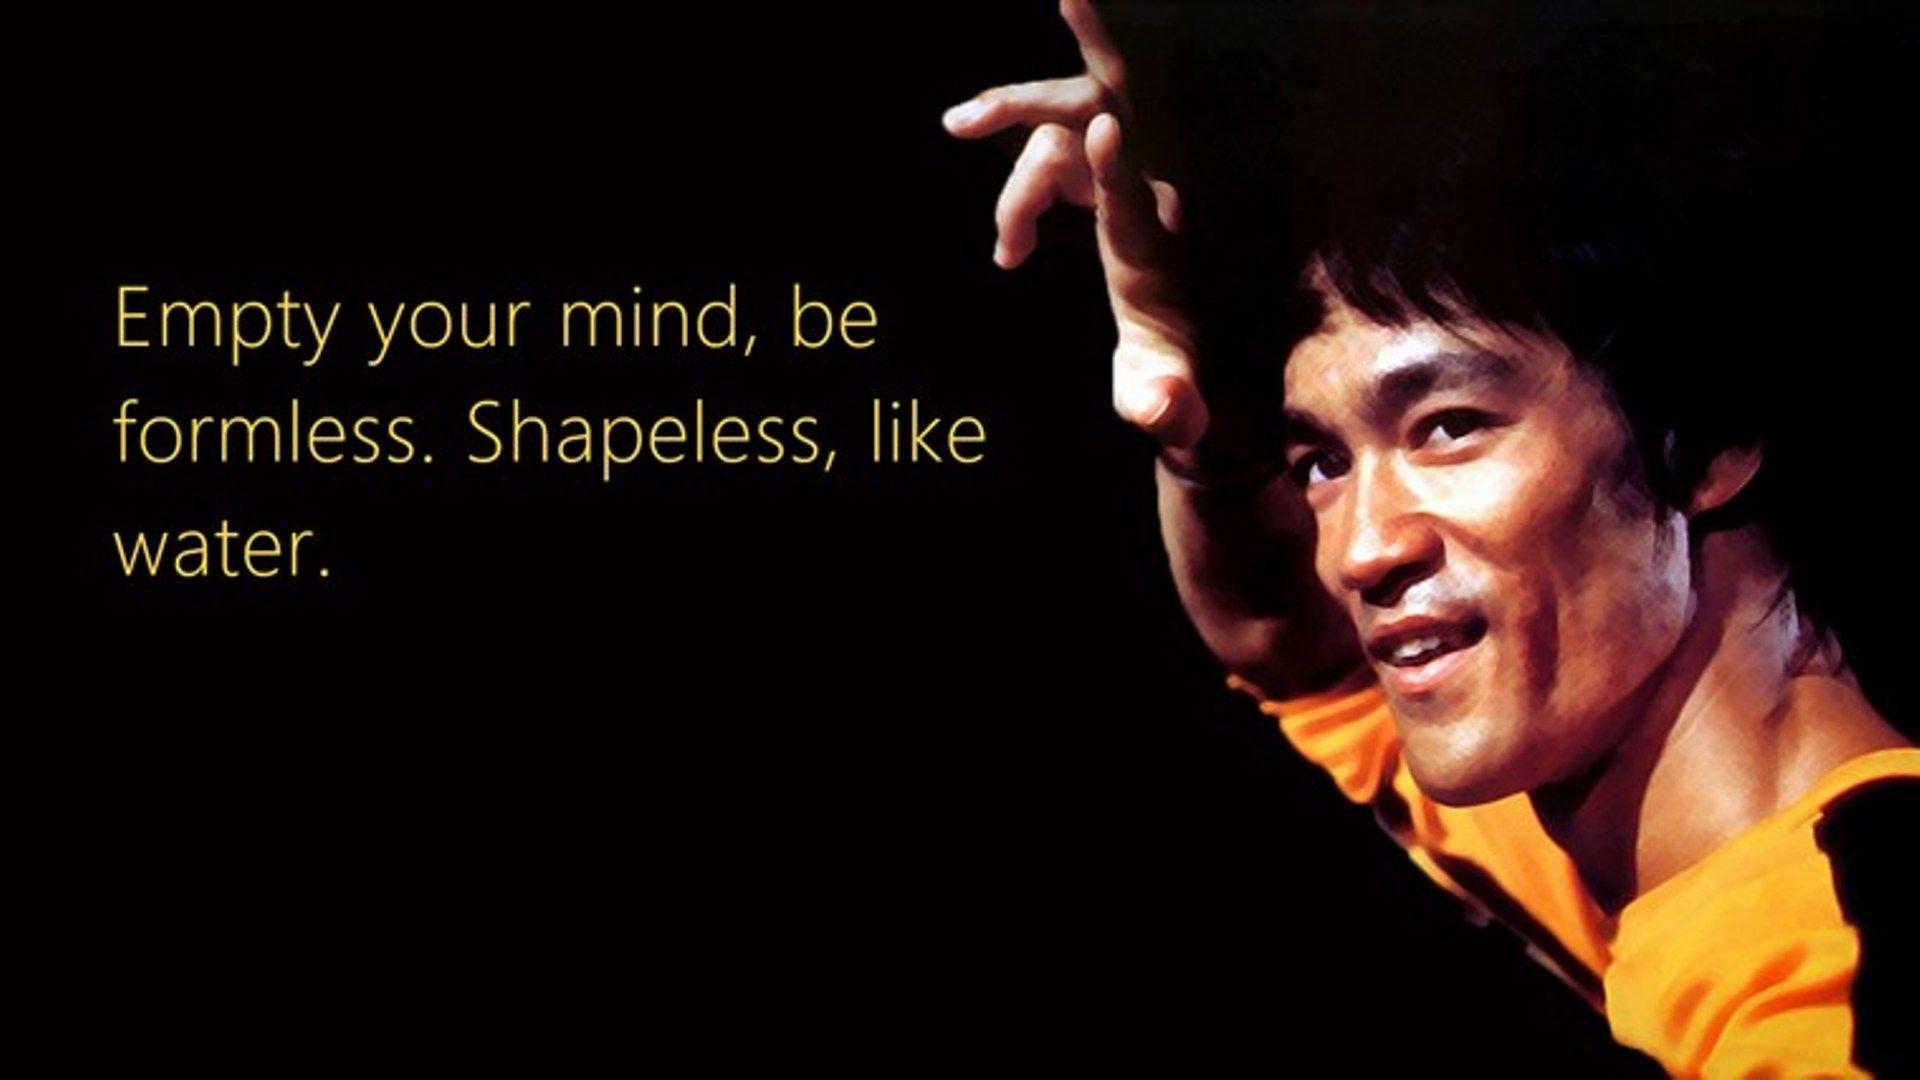 Bruce Lee HD Wallpaper for Free Download on MoboMarket 1920×1080